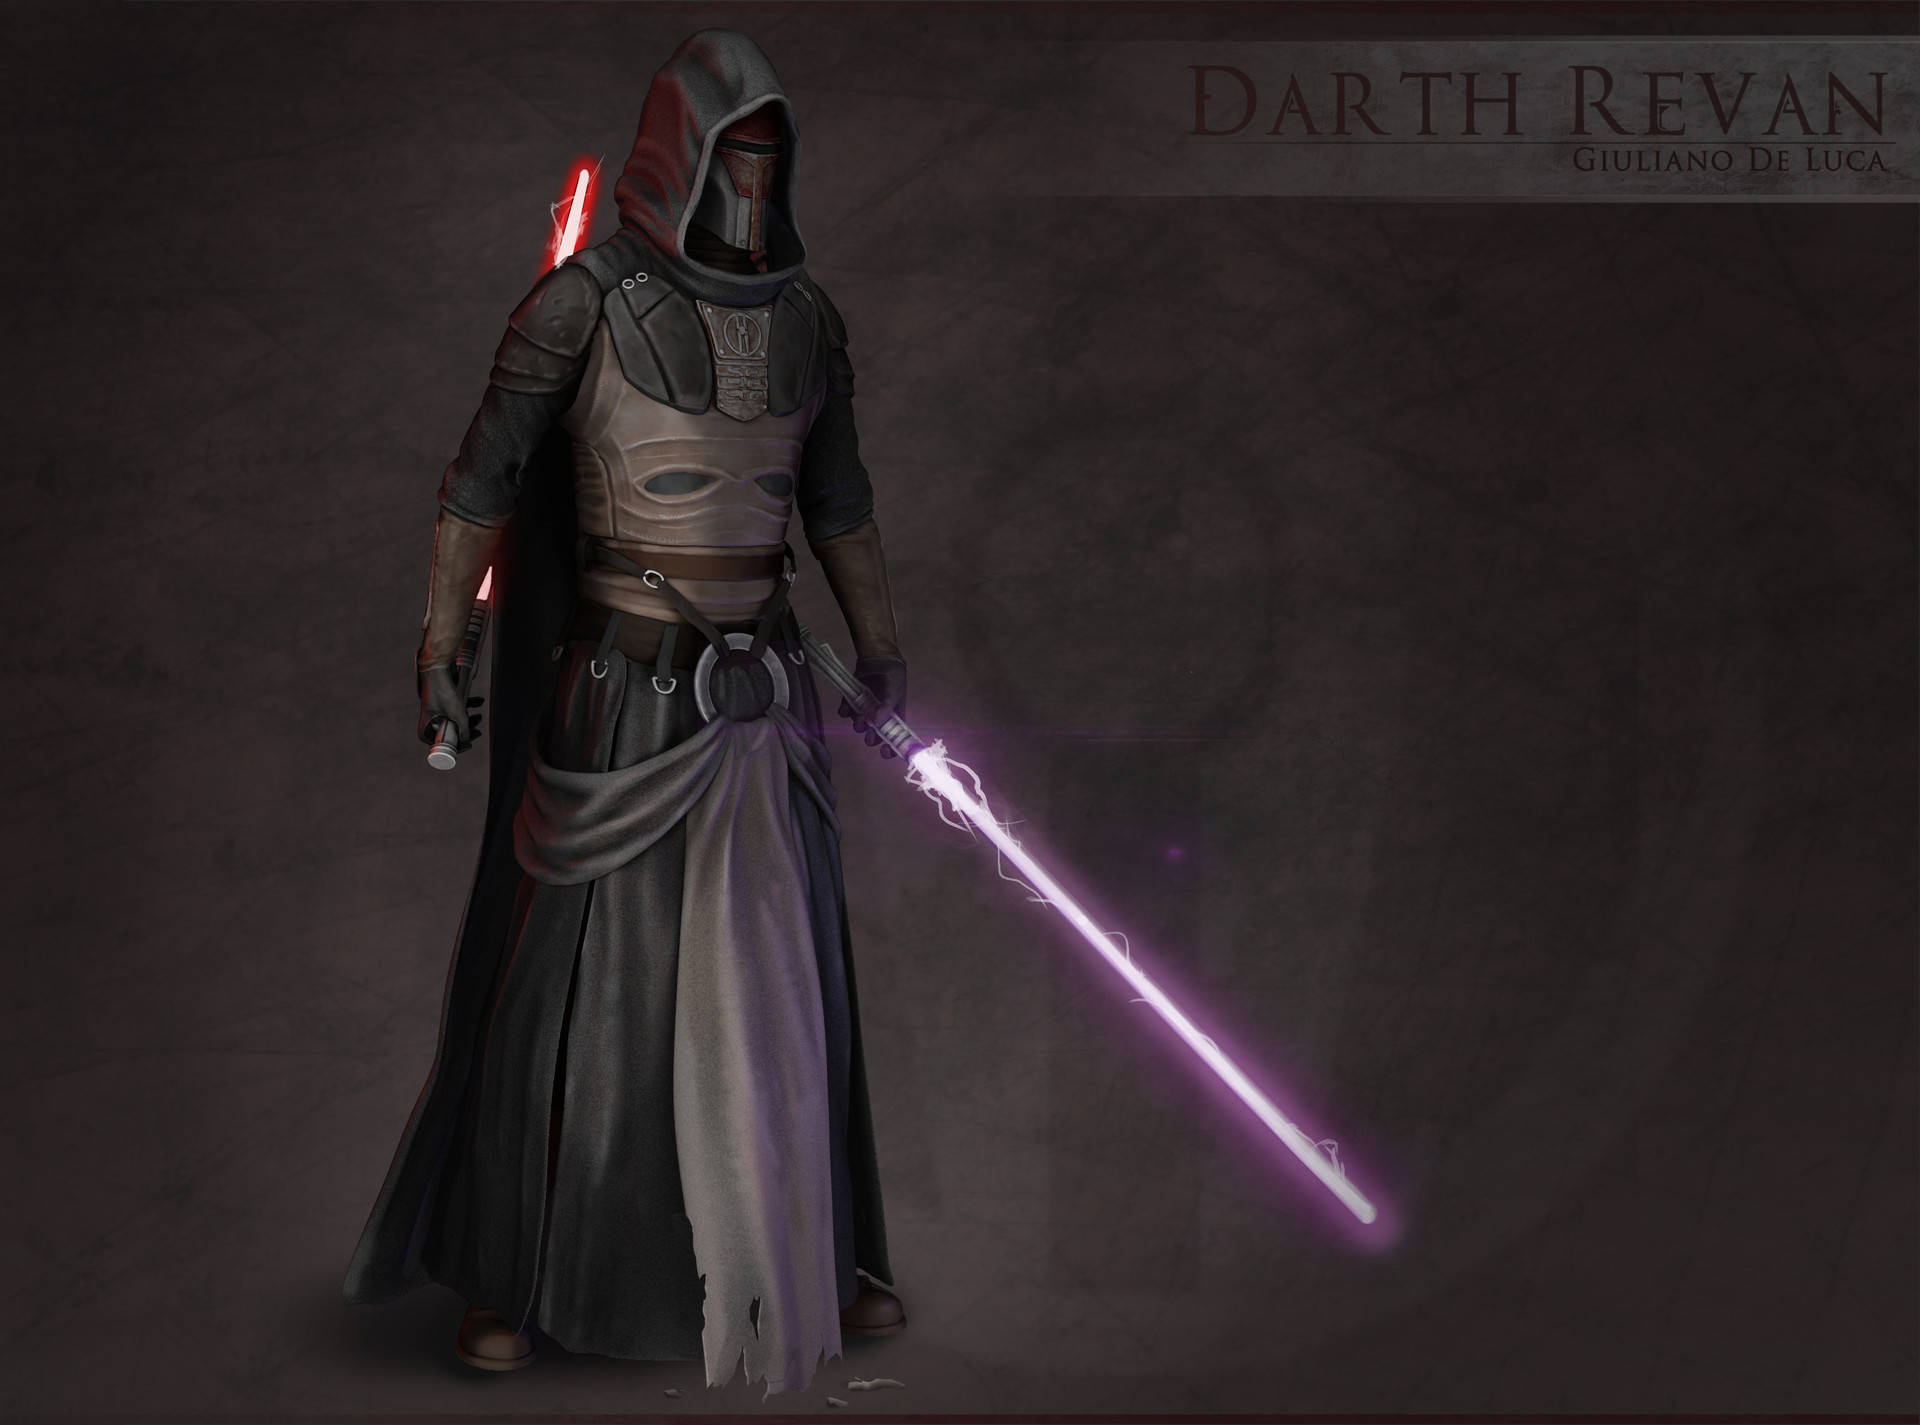 Darth Revan – Star Wars’ Sith Lord Mastering The Dark Side Of The Force Background